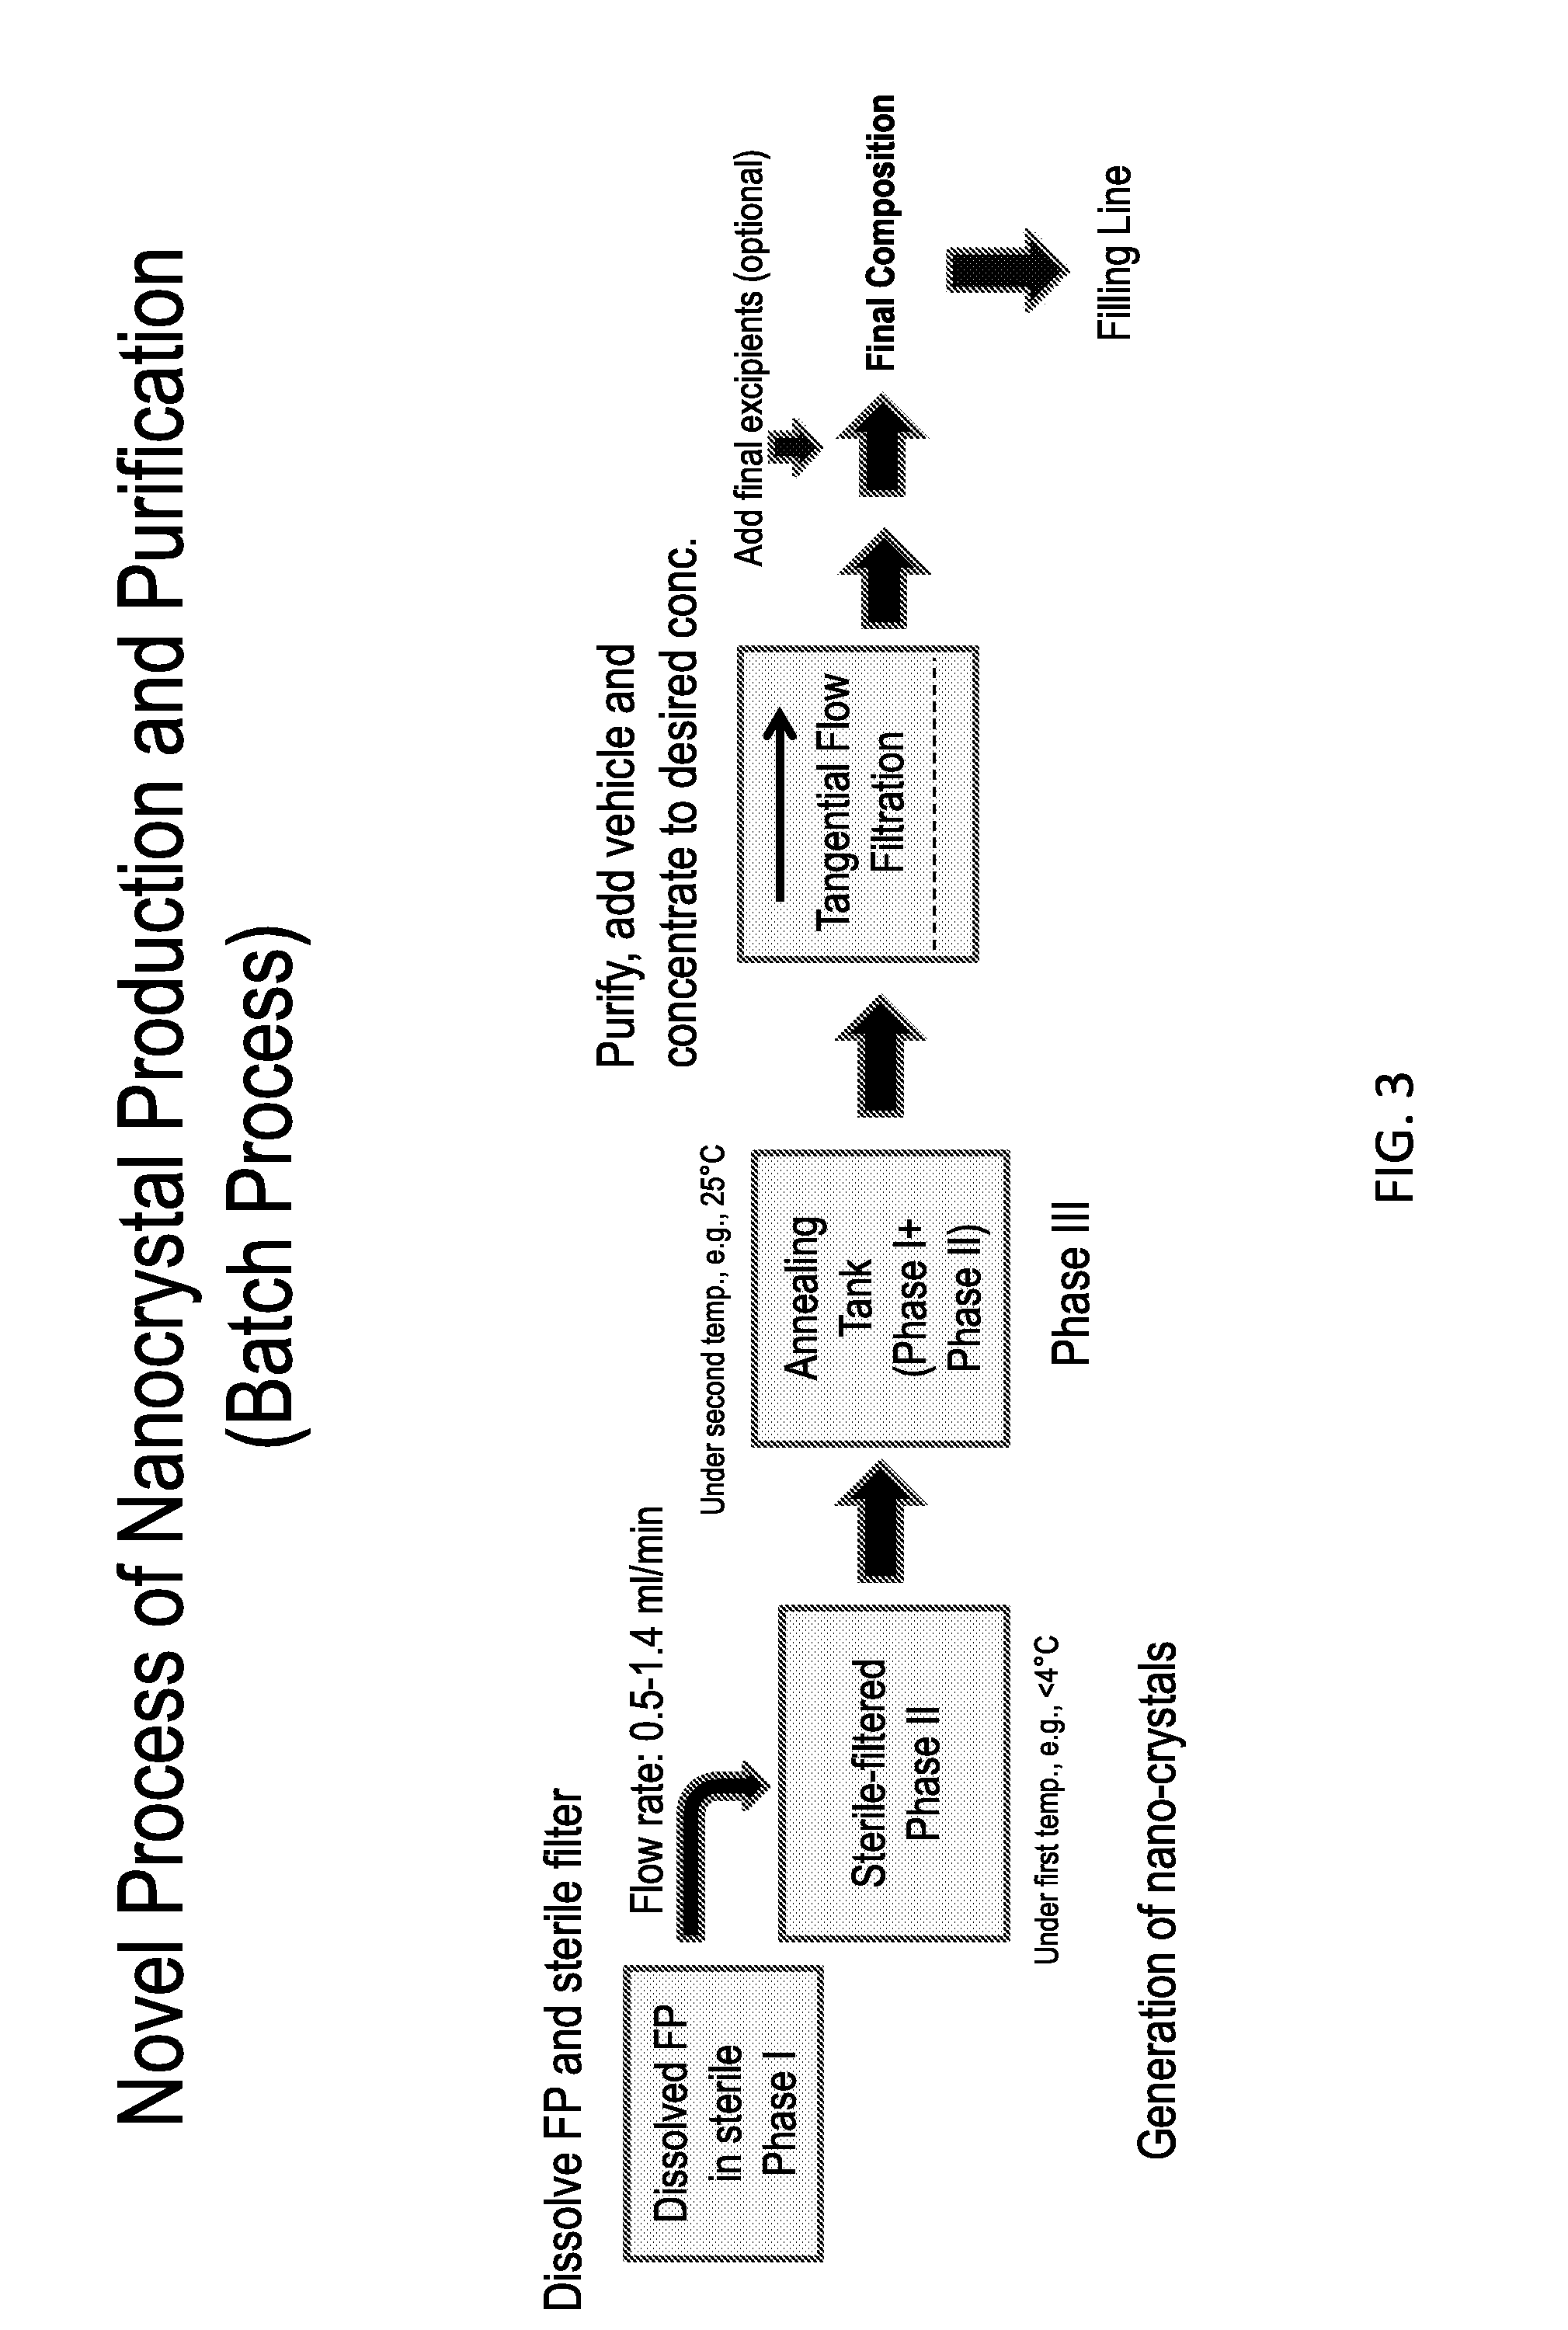 Preparations of hydrophobic therapeutic agents, methods of manufacture and use thereof